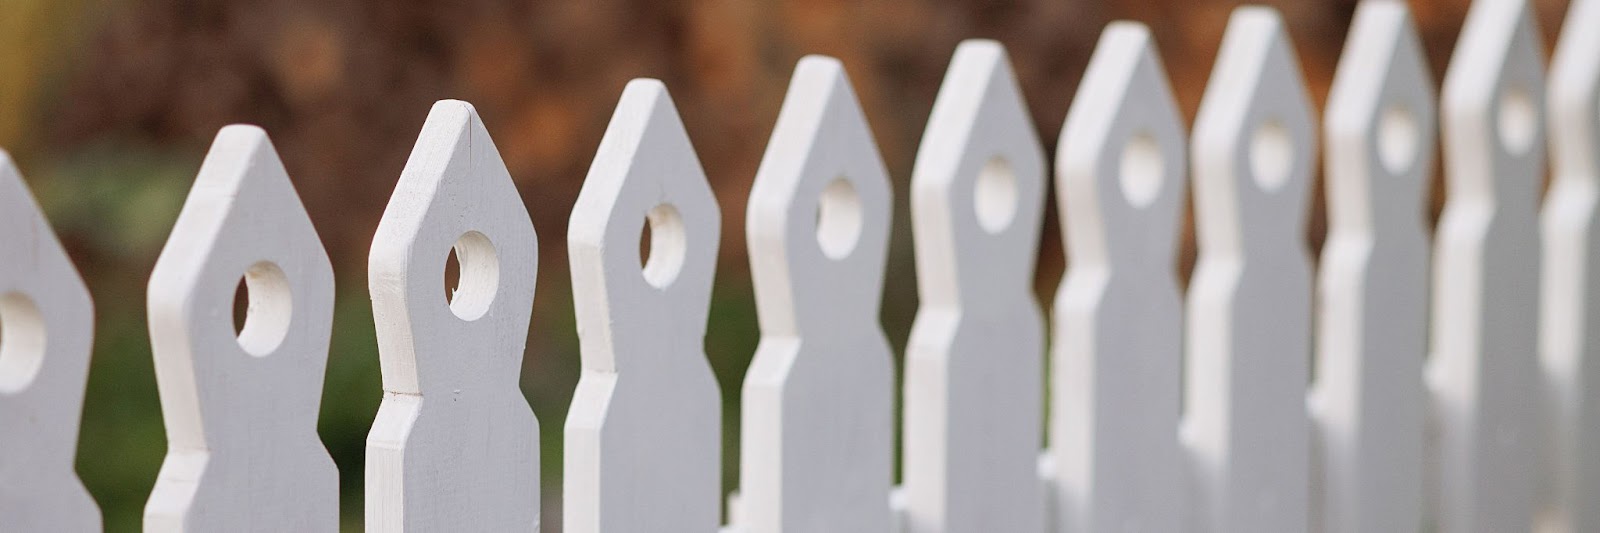 This is a close-up view of a white picket fence in a garden setting, showcasing its intricate design and texture.